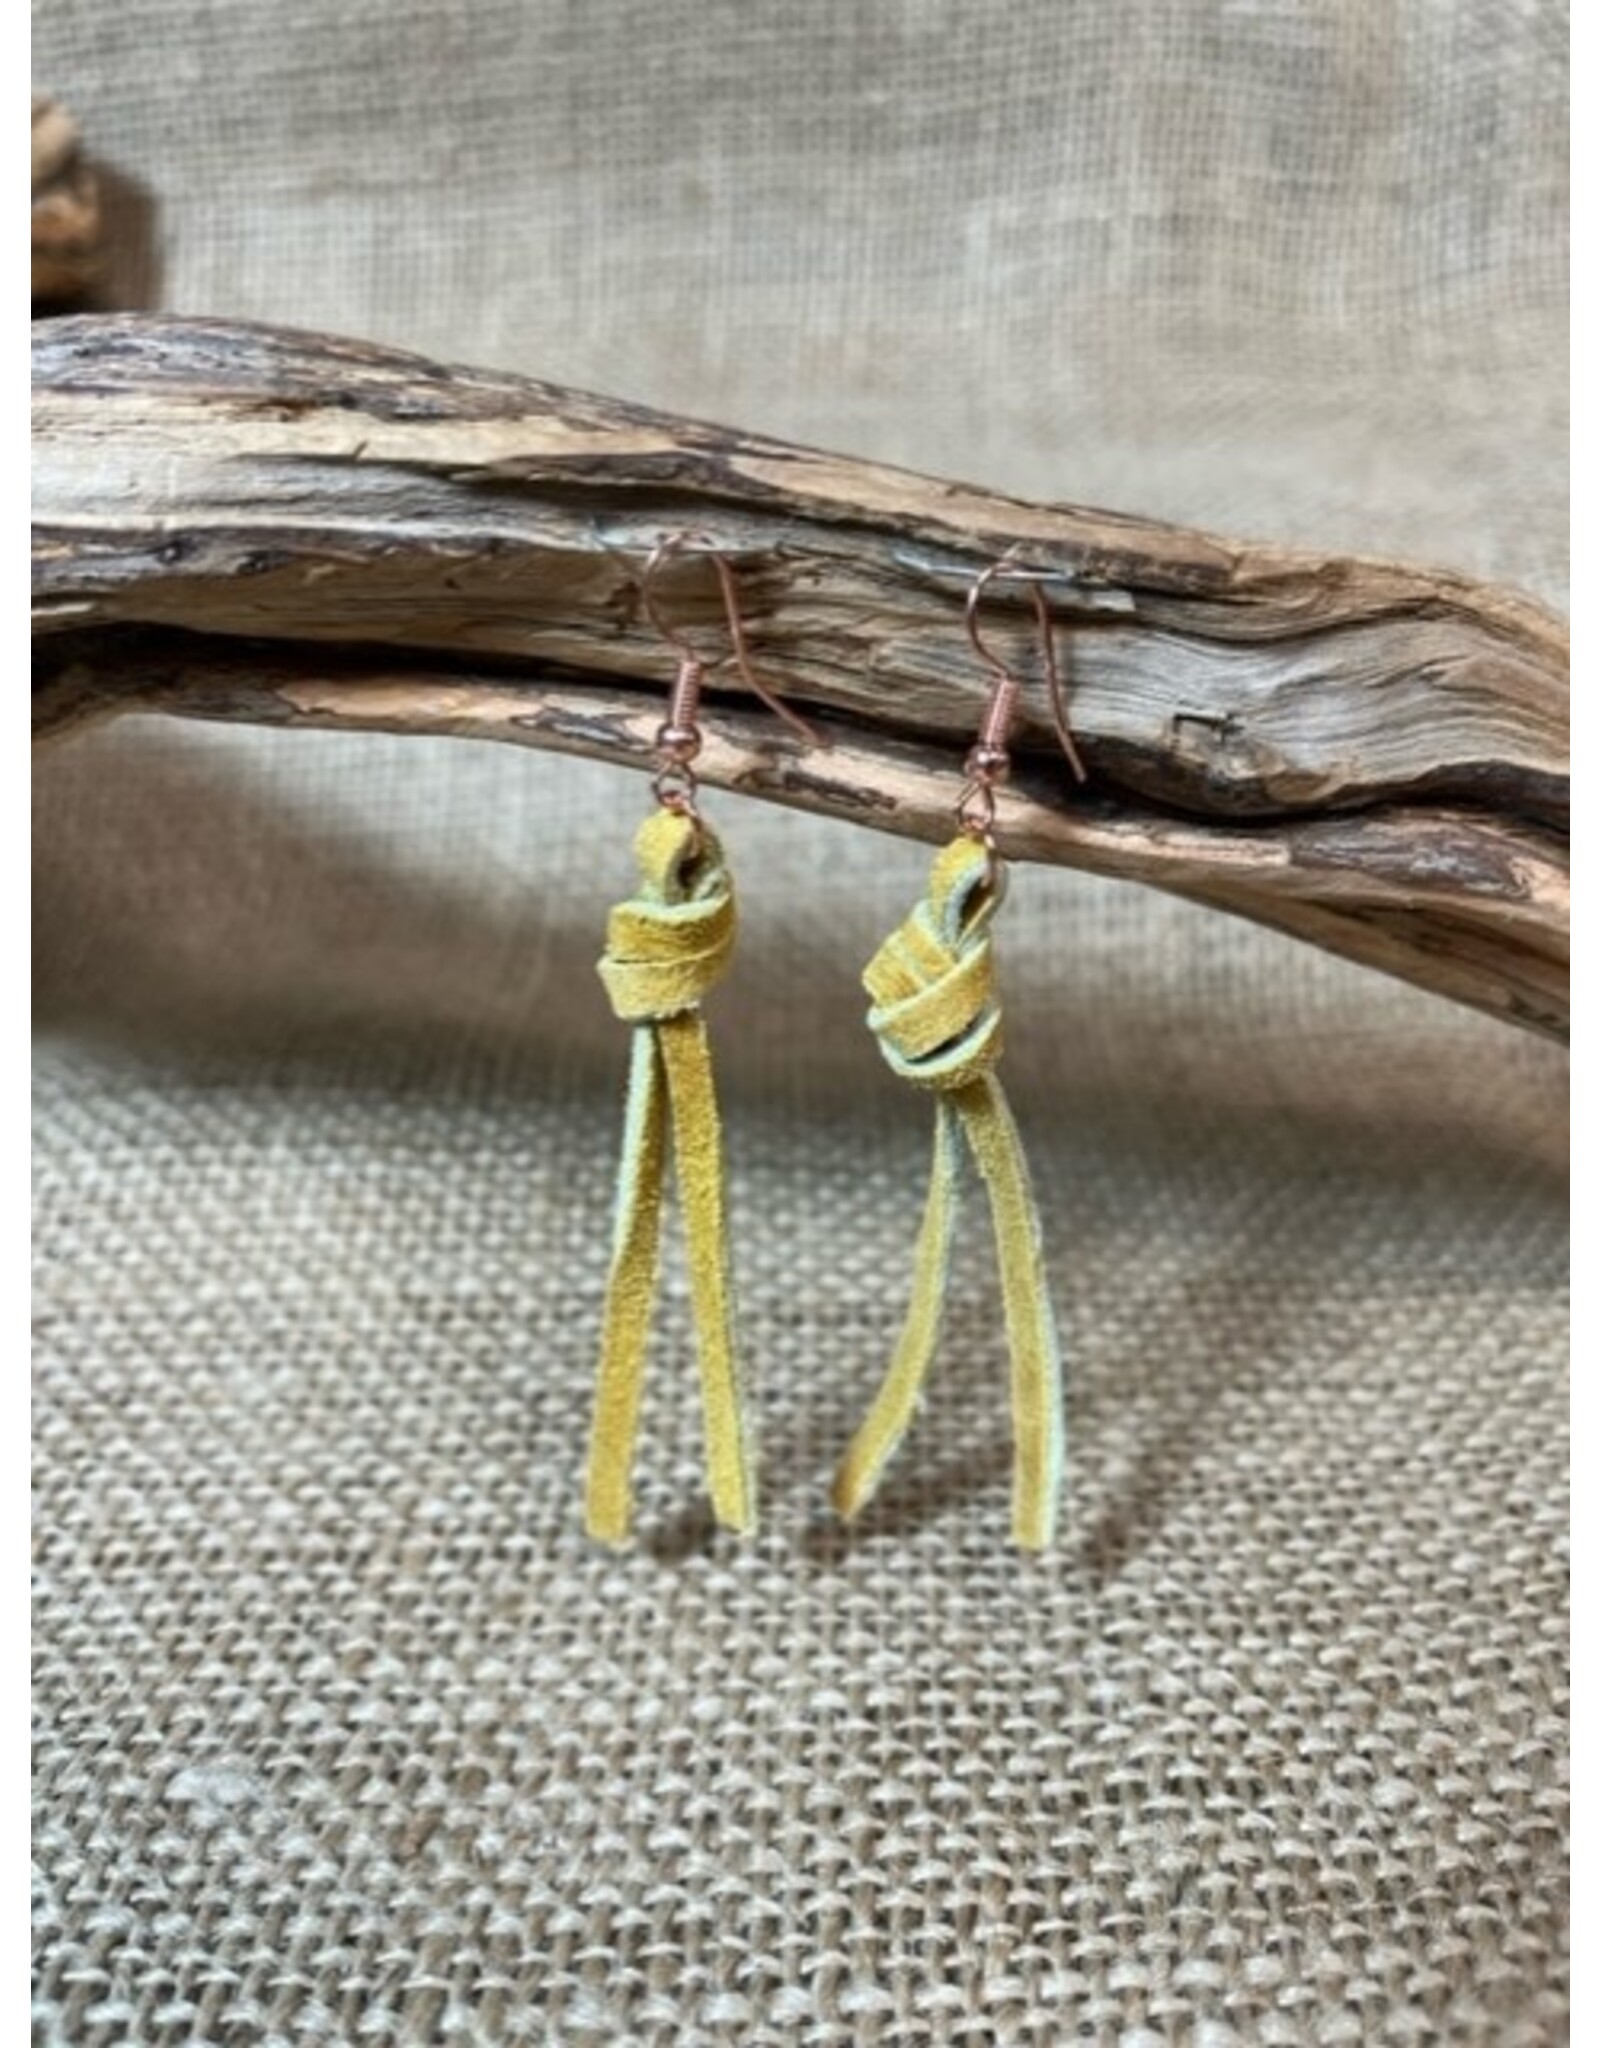 Canada Mothers of All Crafts - Fringe Earrings, Canada